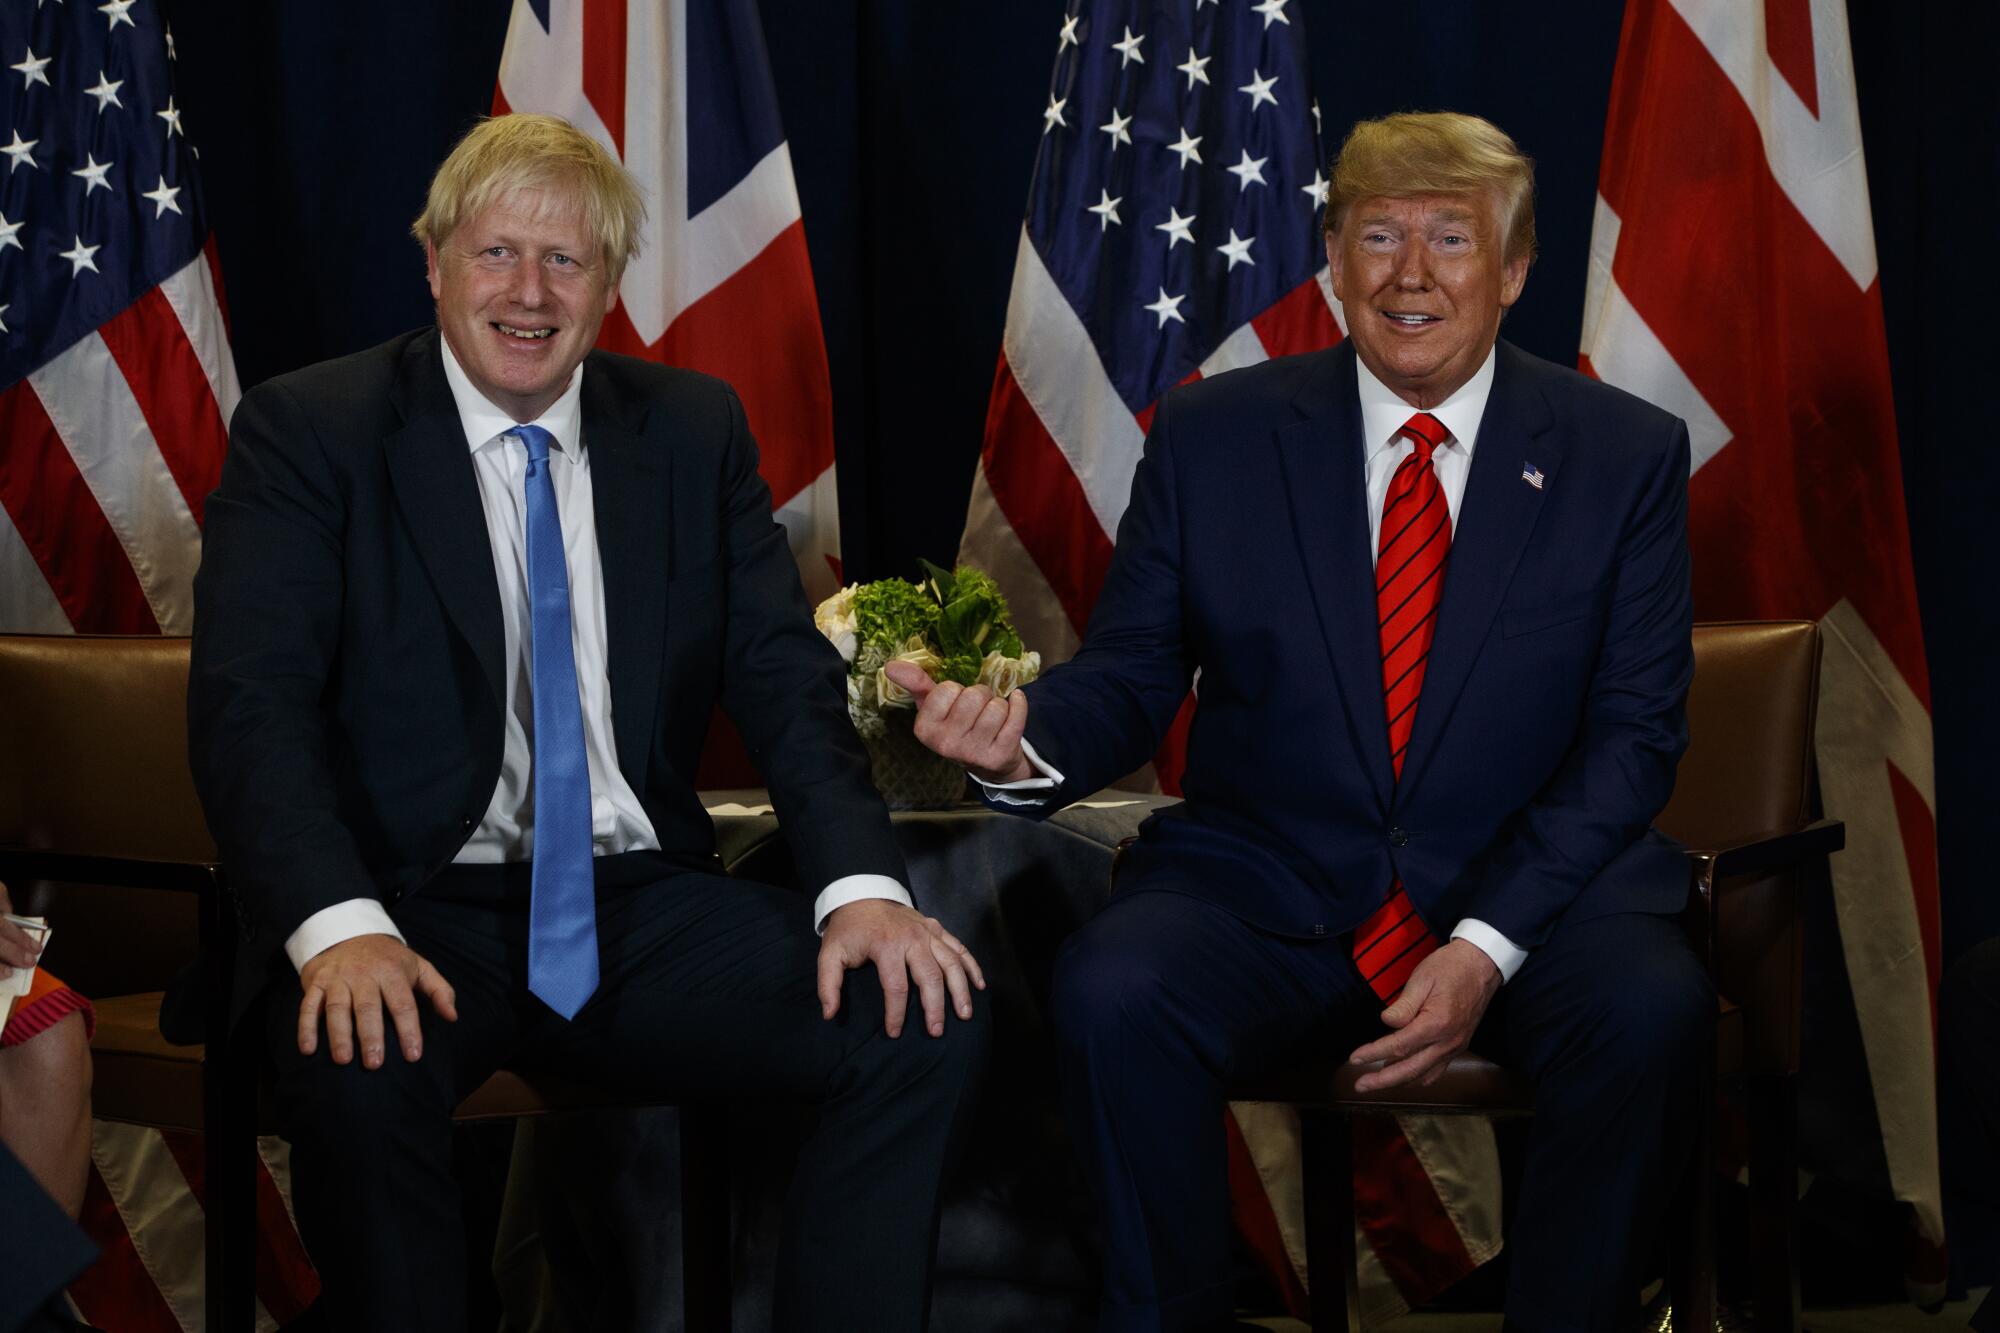 President Donald Trump meets with British Prime Minister Boris Johnson at the United Nations General Assembly in New York